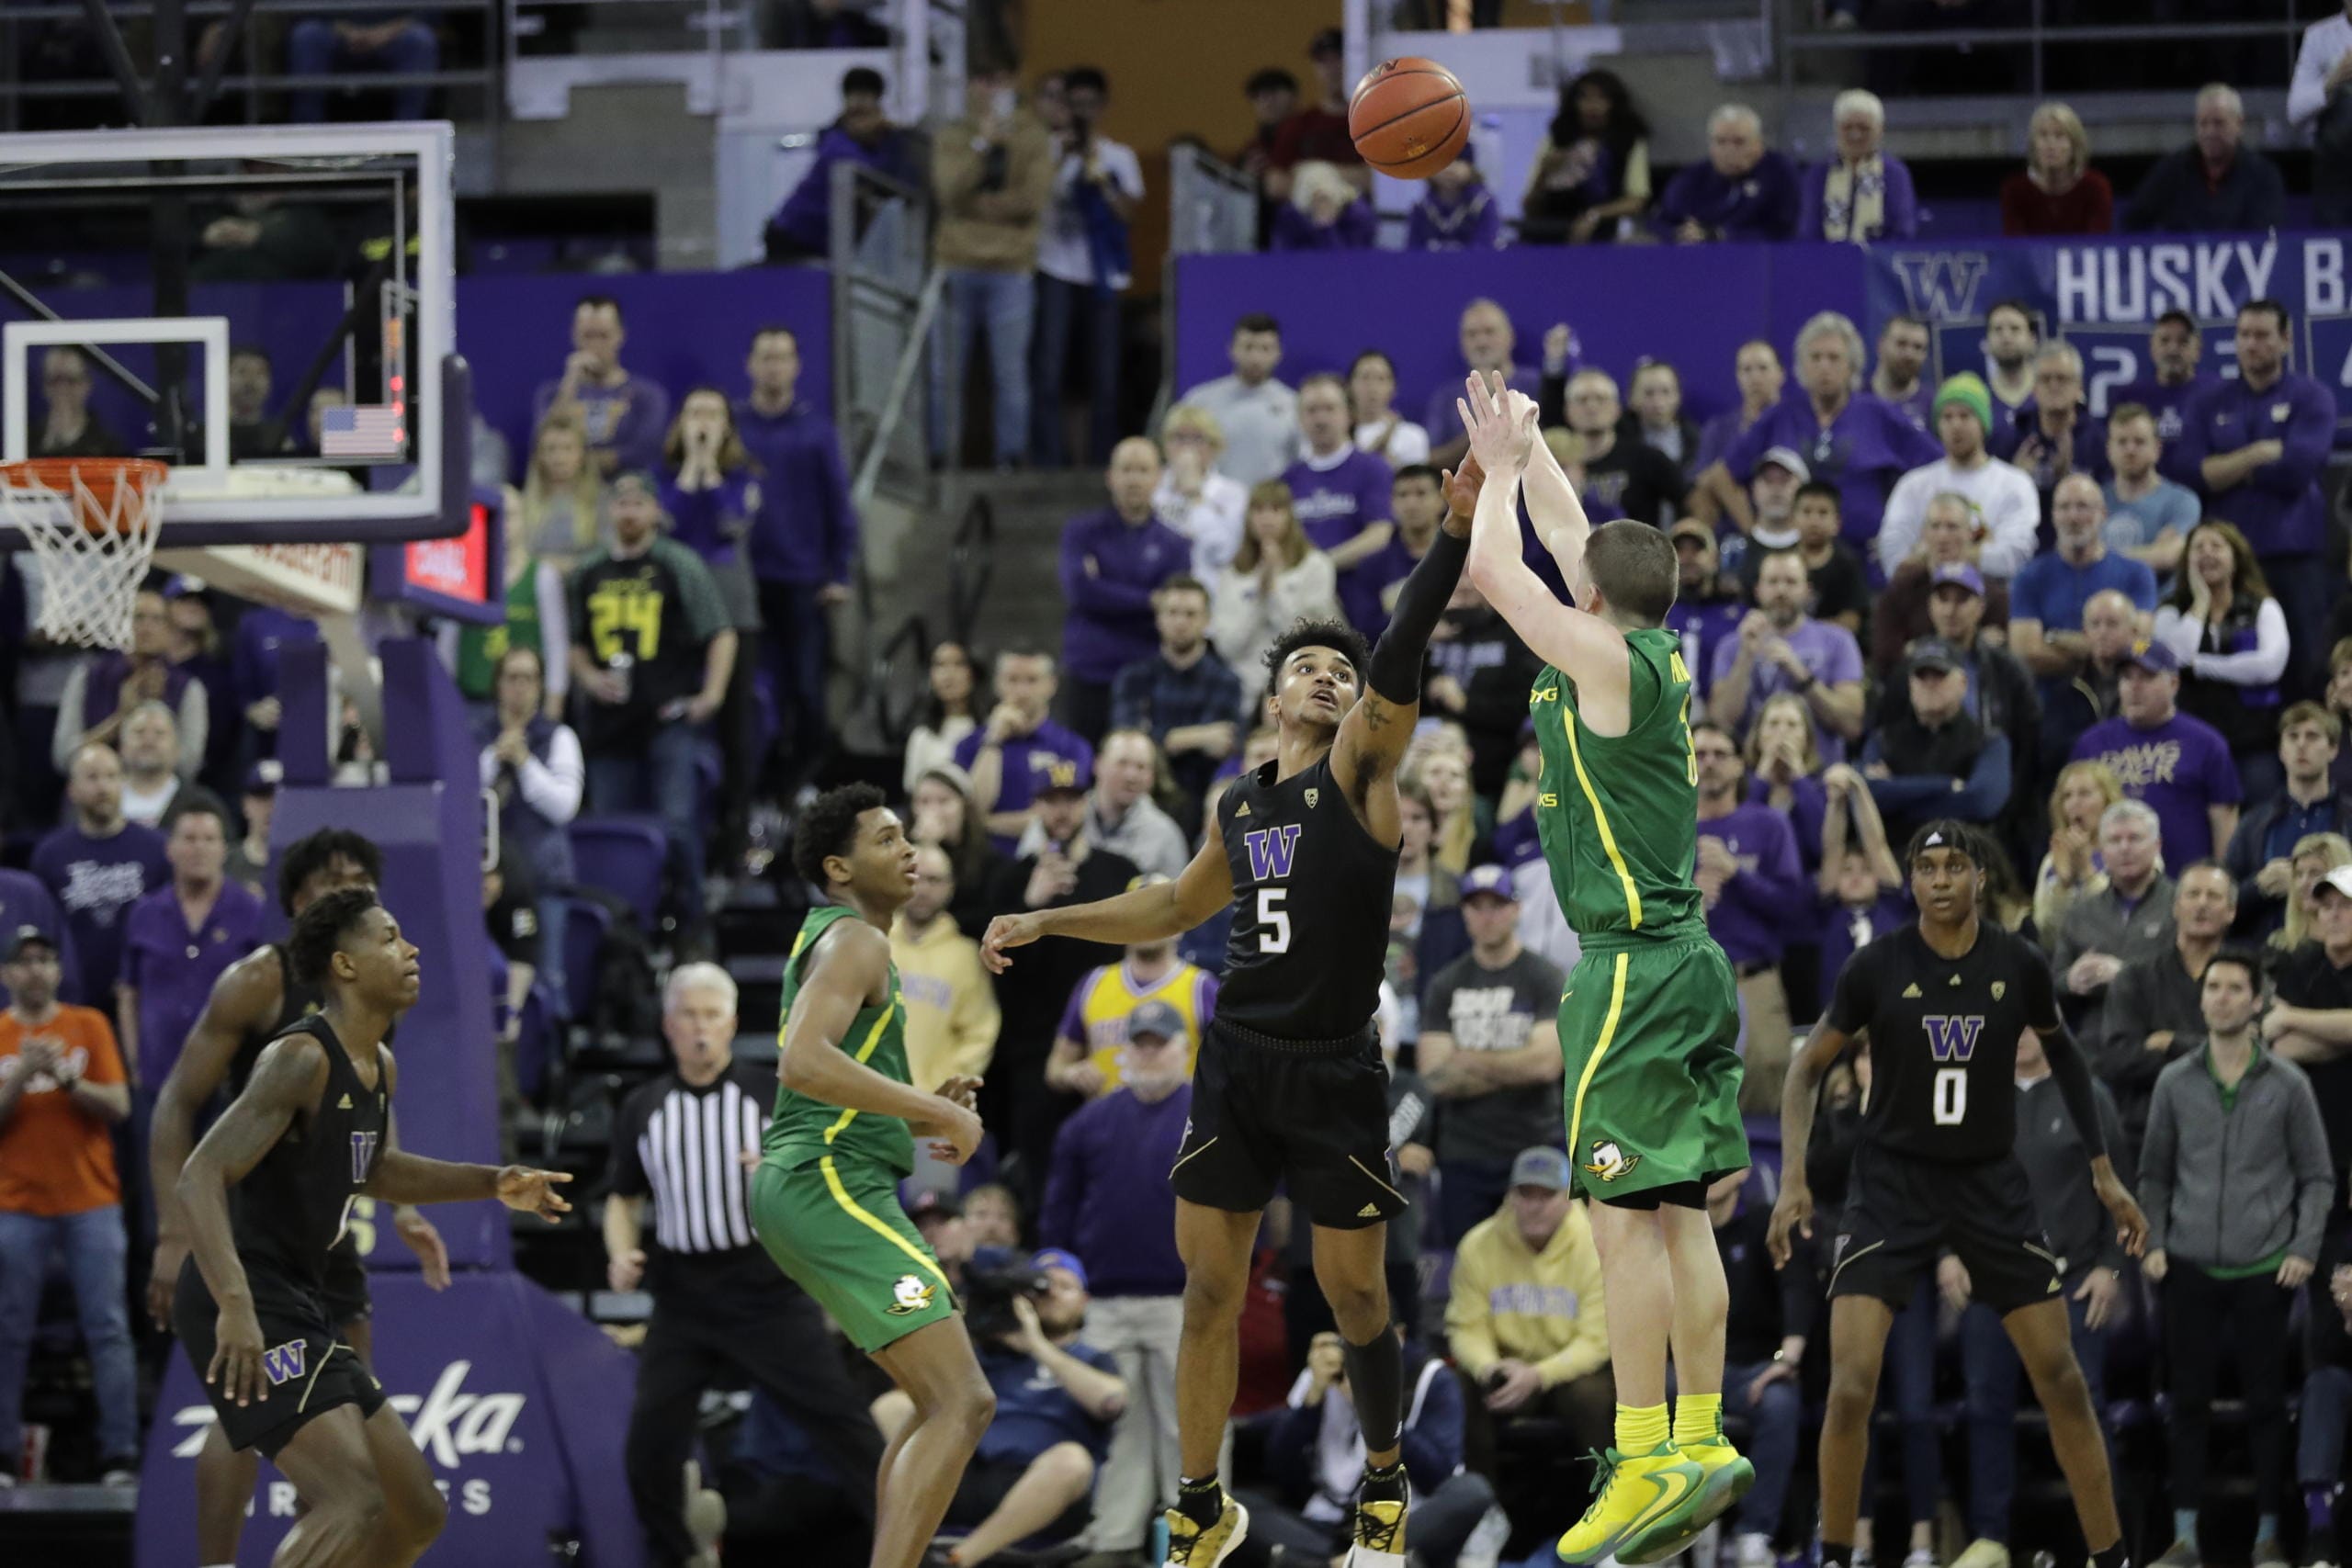 Oregon guard Payton Pritchard, right, shoots the game-winning 3-point basket as Washington guard Jamal Bey (5) tries for the block during overtime in an NCAA college basketball game, Saturday, Jan. 18, 2020, in Seattle. Oregon won 64-61 in overtime. (AP Photo/Ted S.